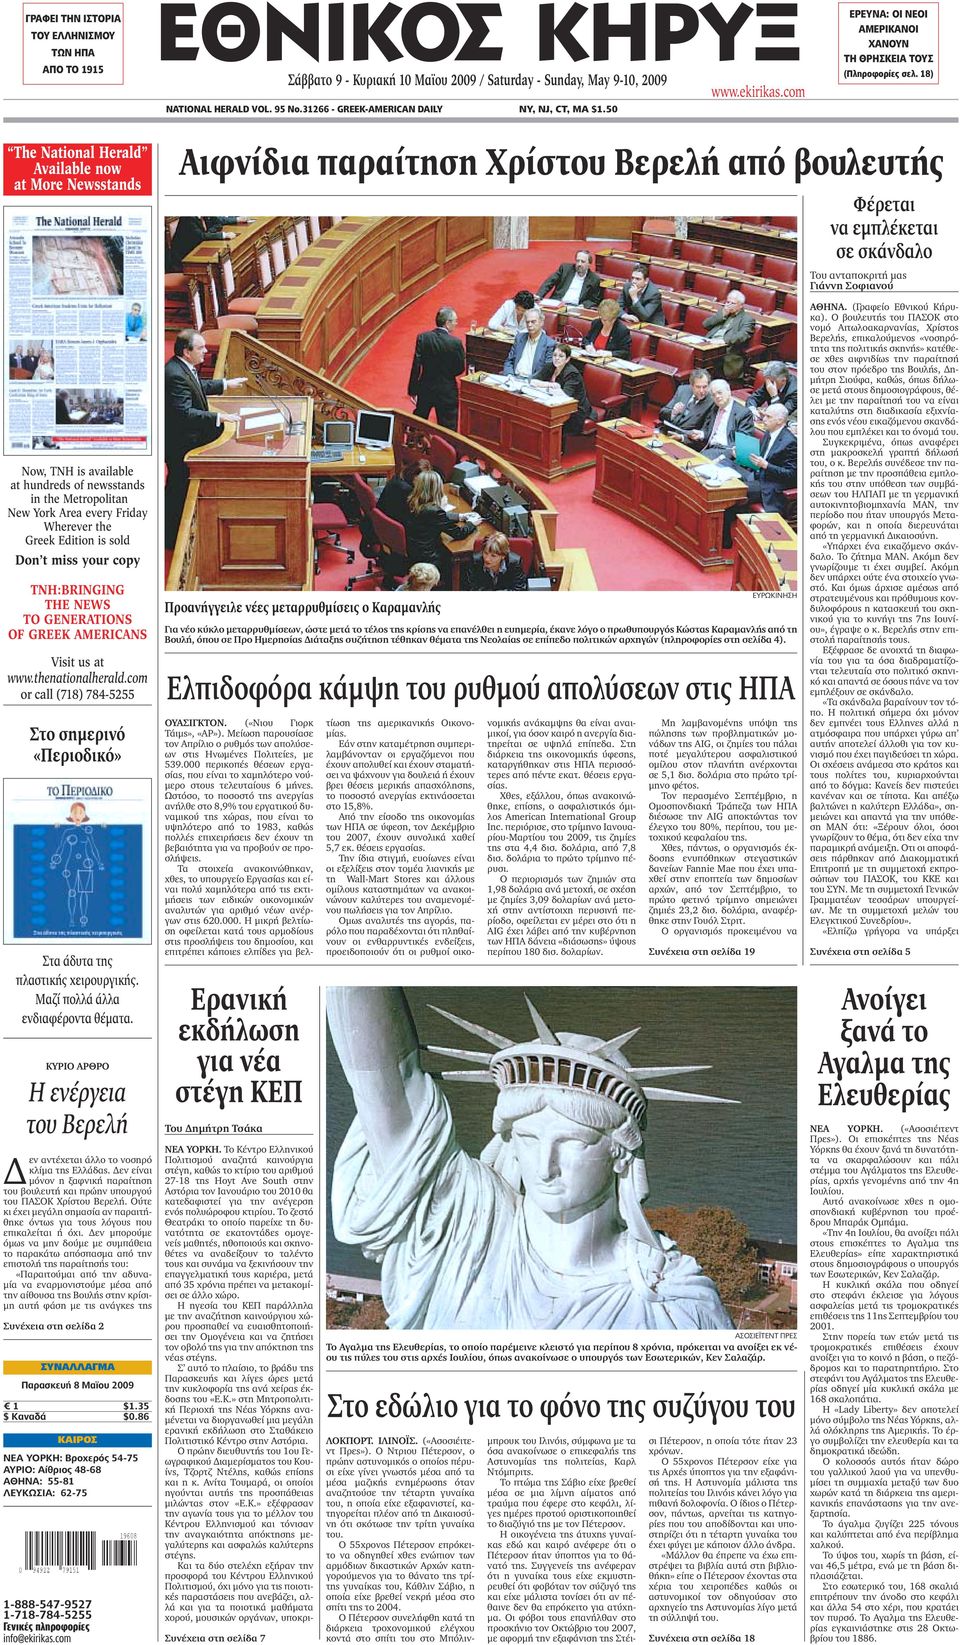 18) The National Herald Available now at More Newsstands Now, TNH is available at hundreds of newsstands in the Metropolitan New York Area every Friday Wherever the Greek Edition is sold Don t miss